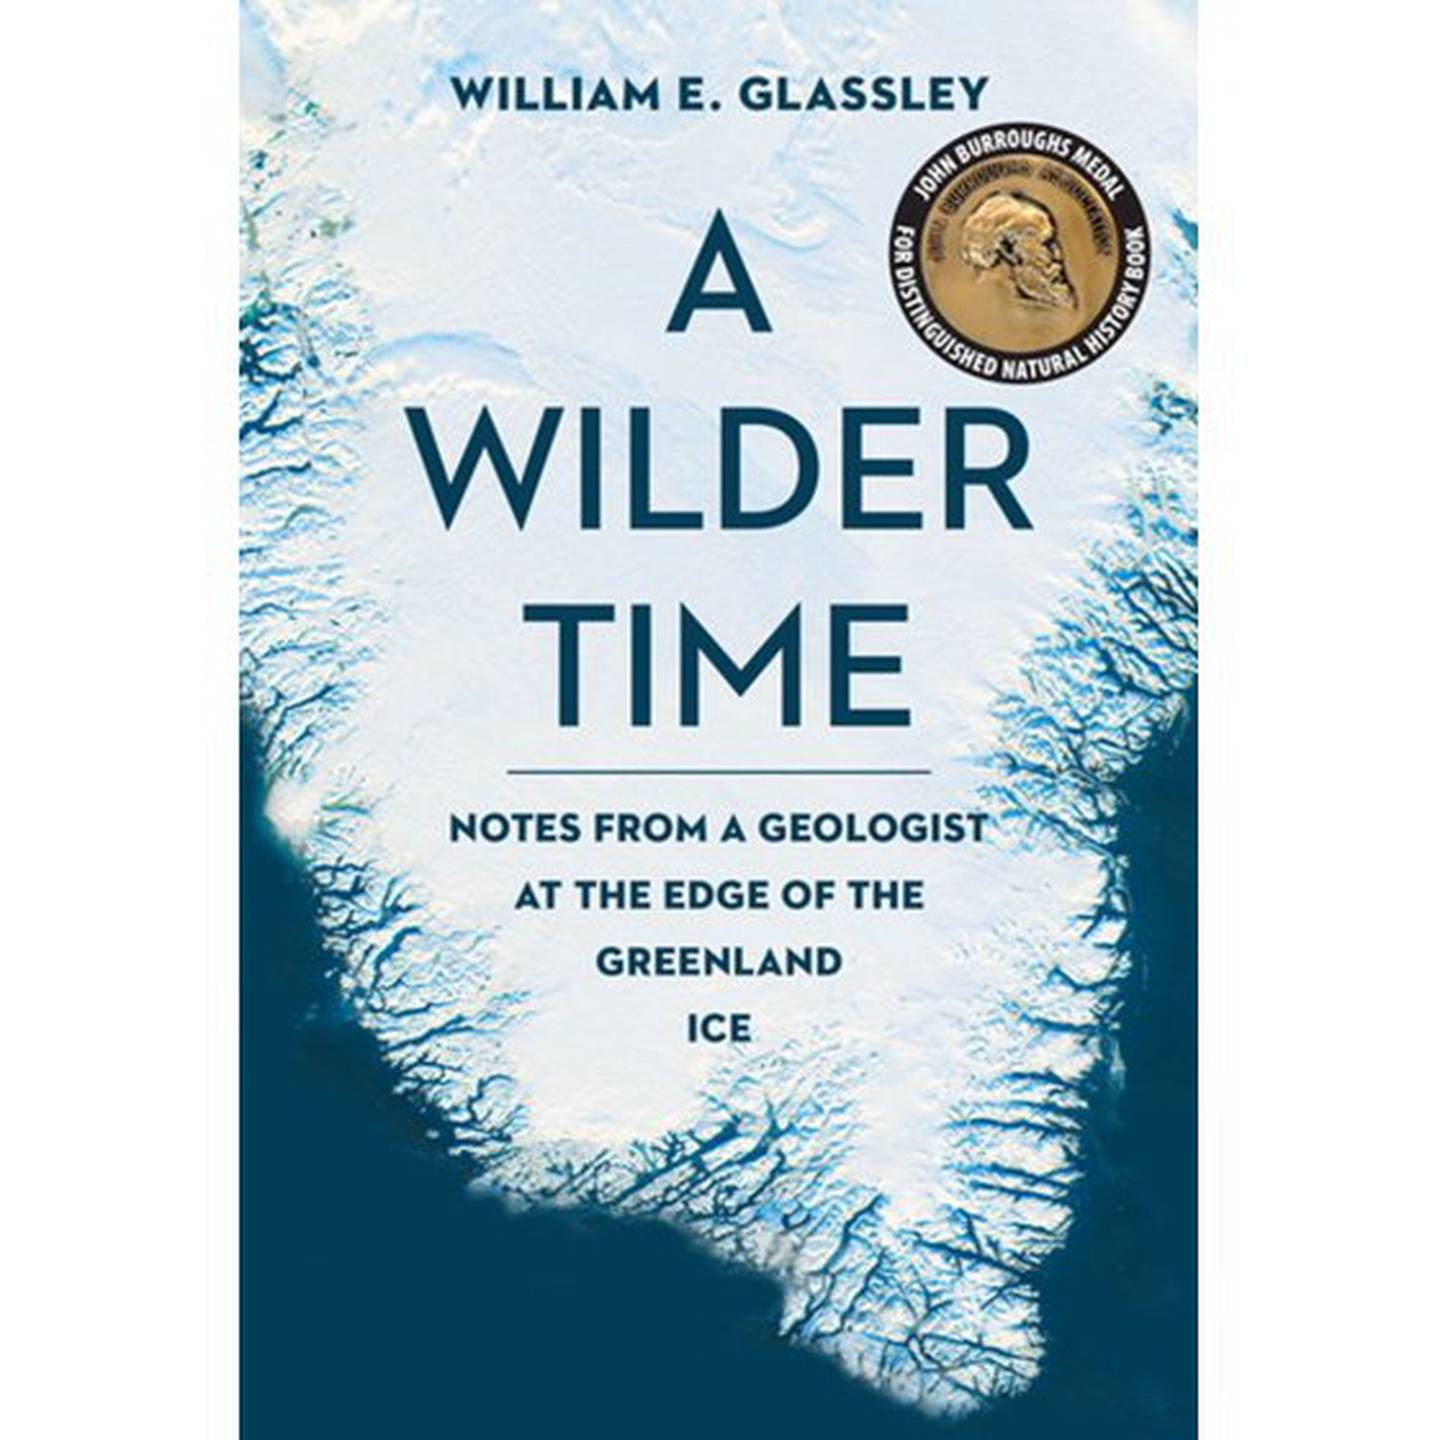 A Wilder Time: Notes From a Geologist at the Edge of the Greenland Ice